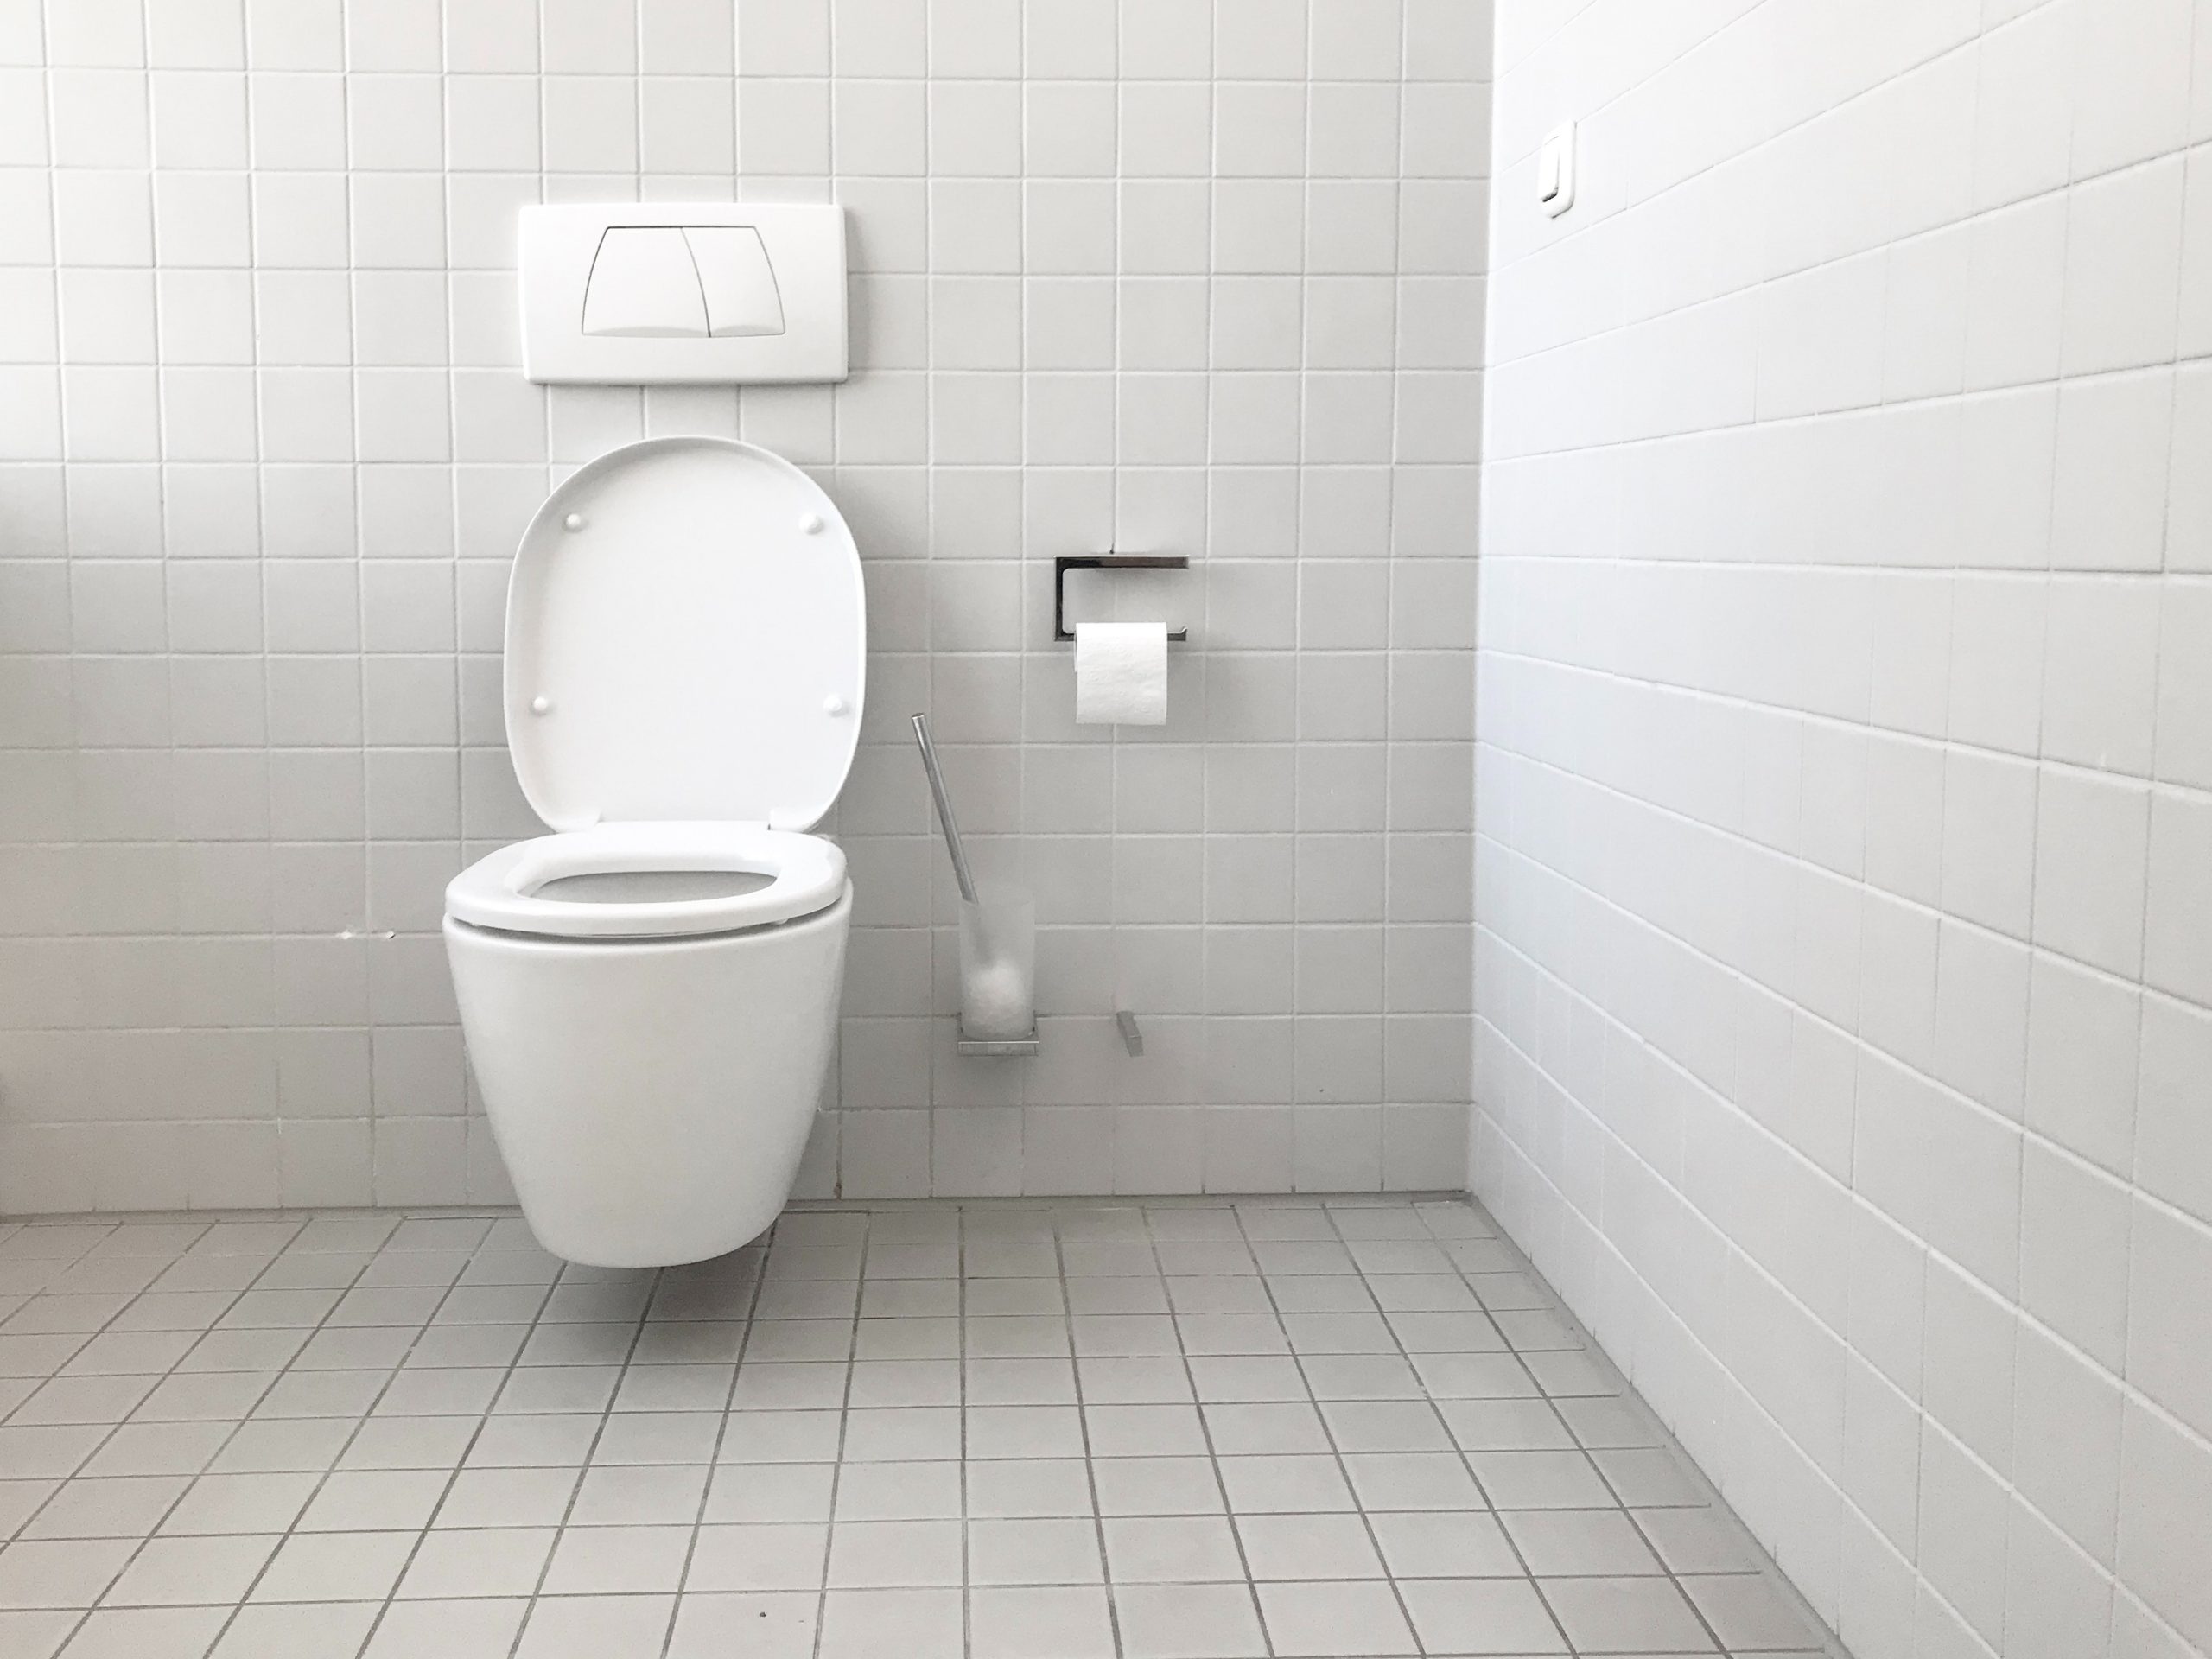 mistake to avoid when selling your home - leaving toilet lid up